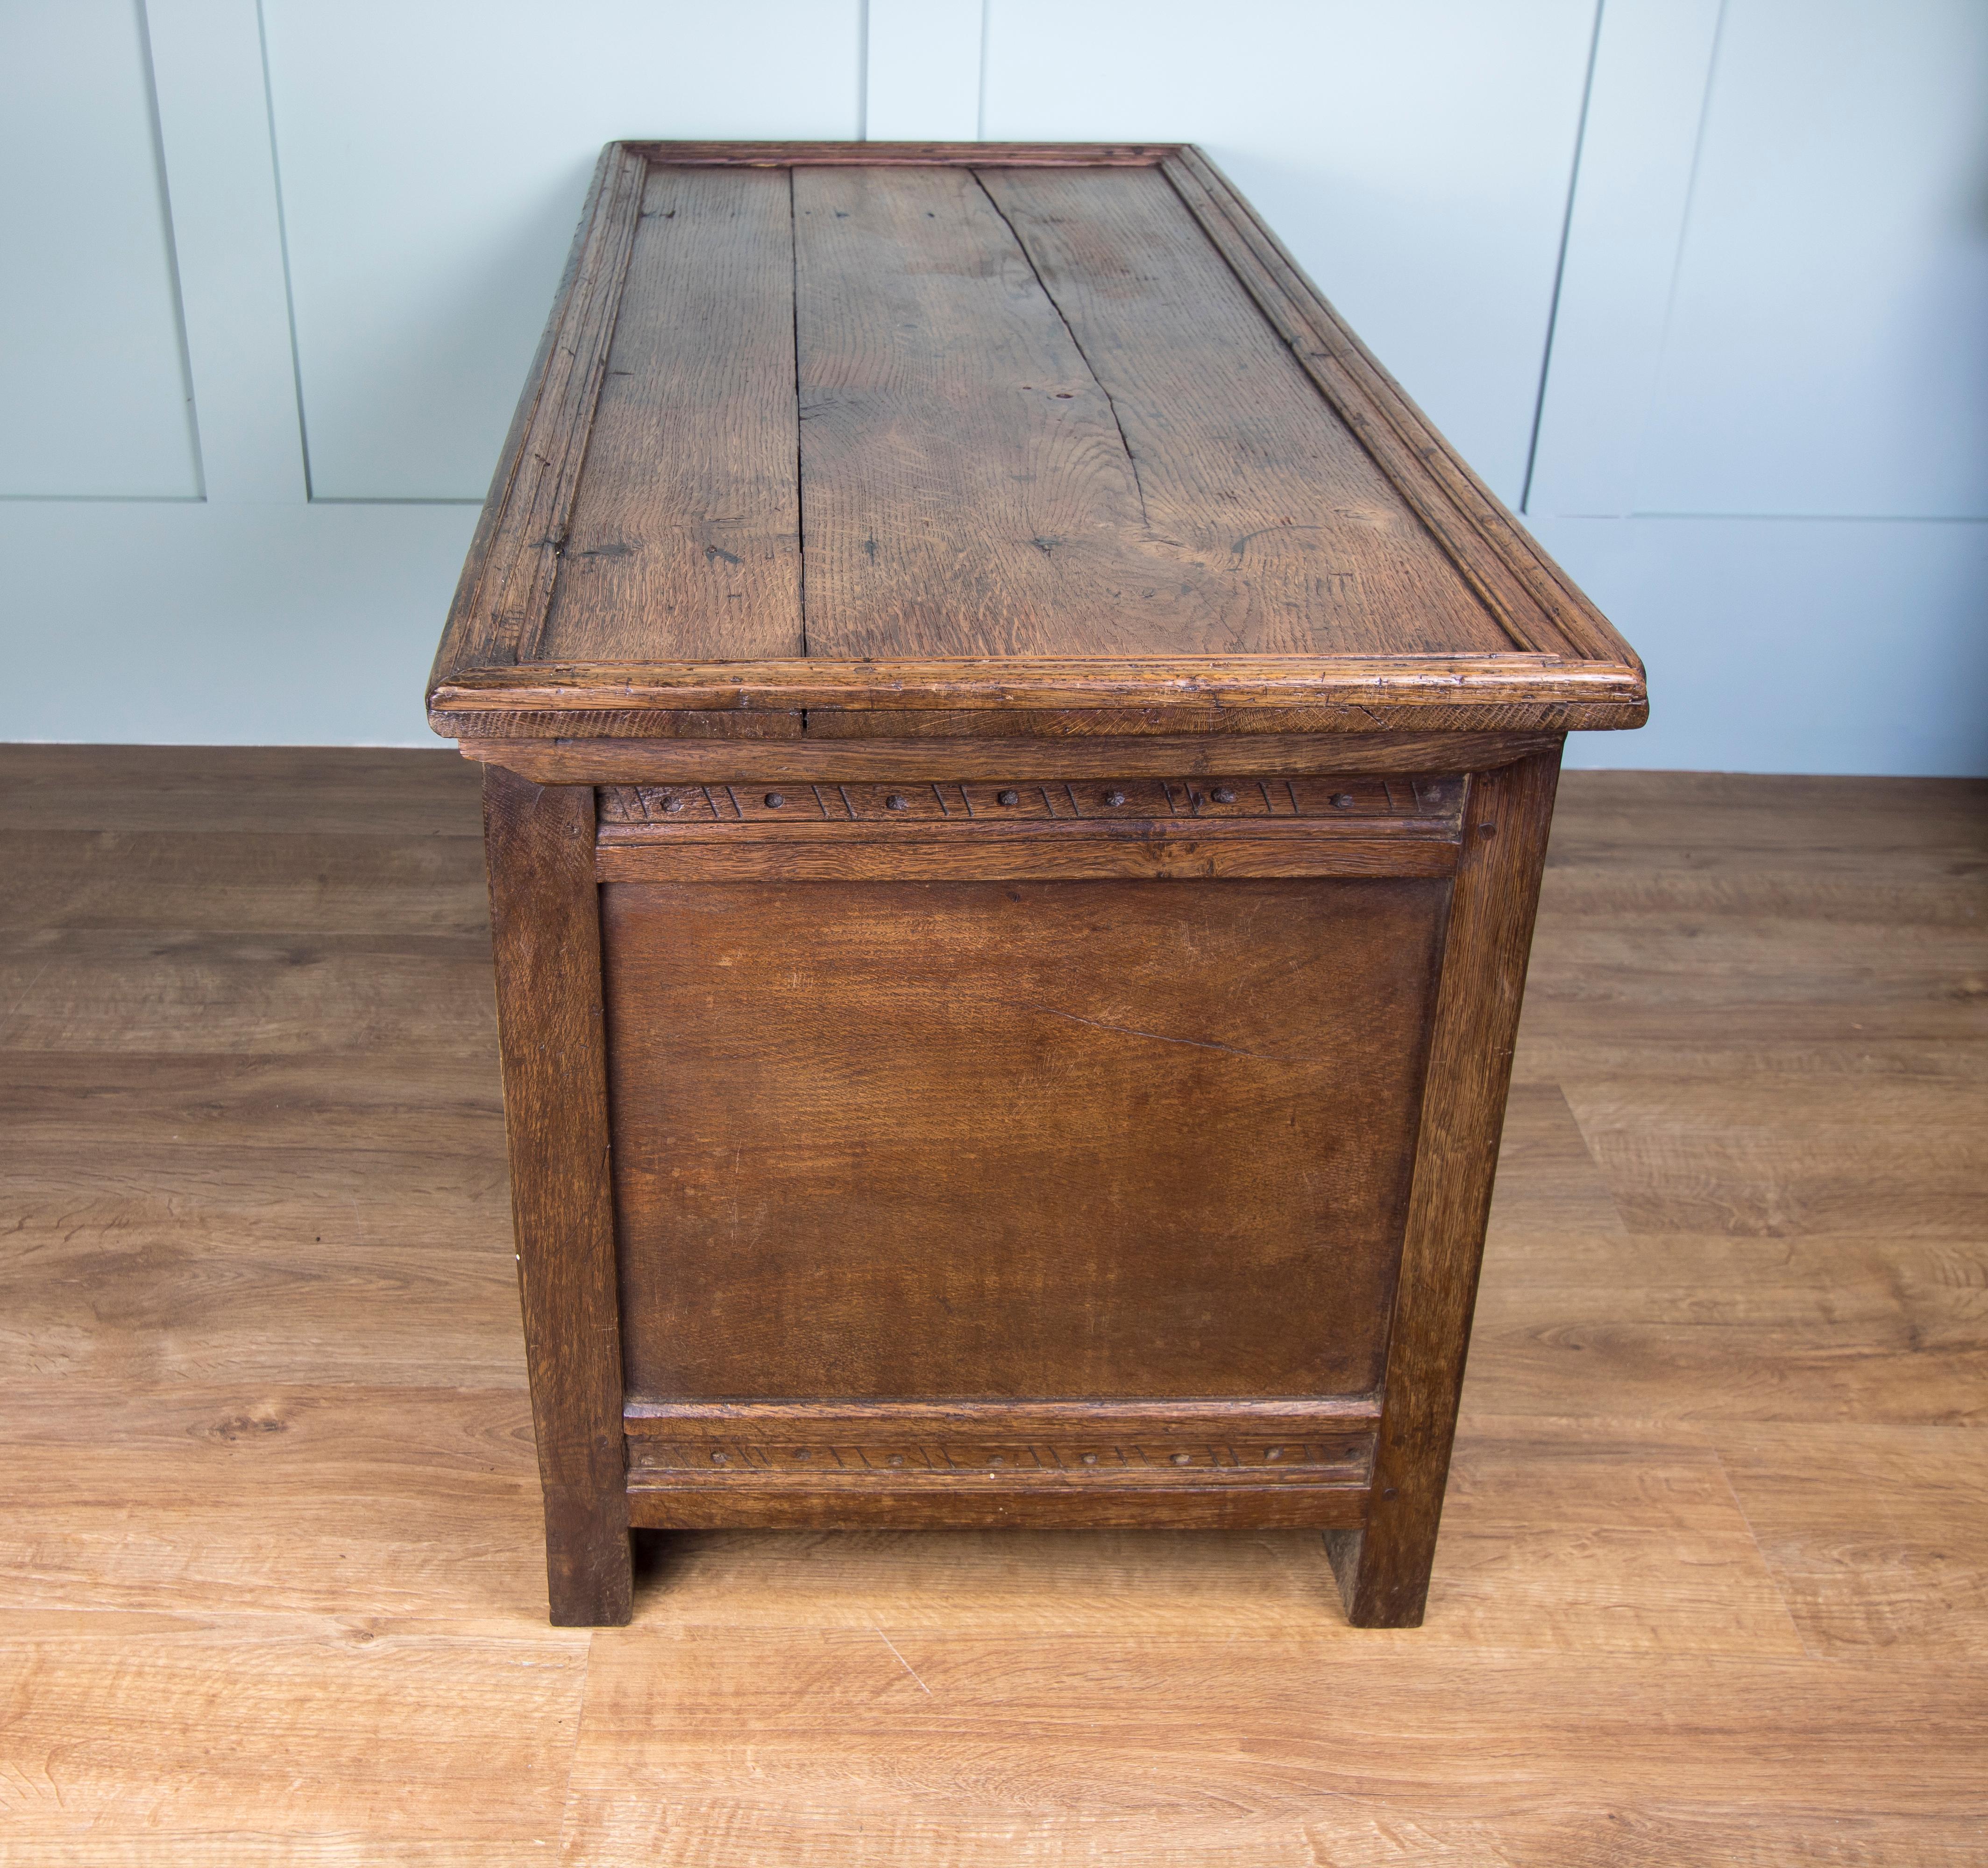 This sturdy oak joined coffer believed to date from the mid-18th century. Decorative carved front featuring three panels. Hinged three plank top with original ironmongery but no key. We are investigating having a key made for it, so please message